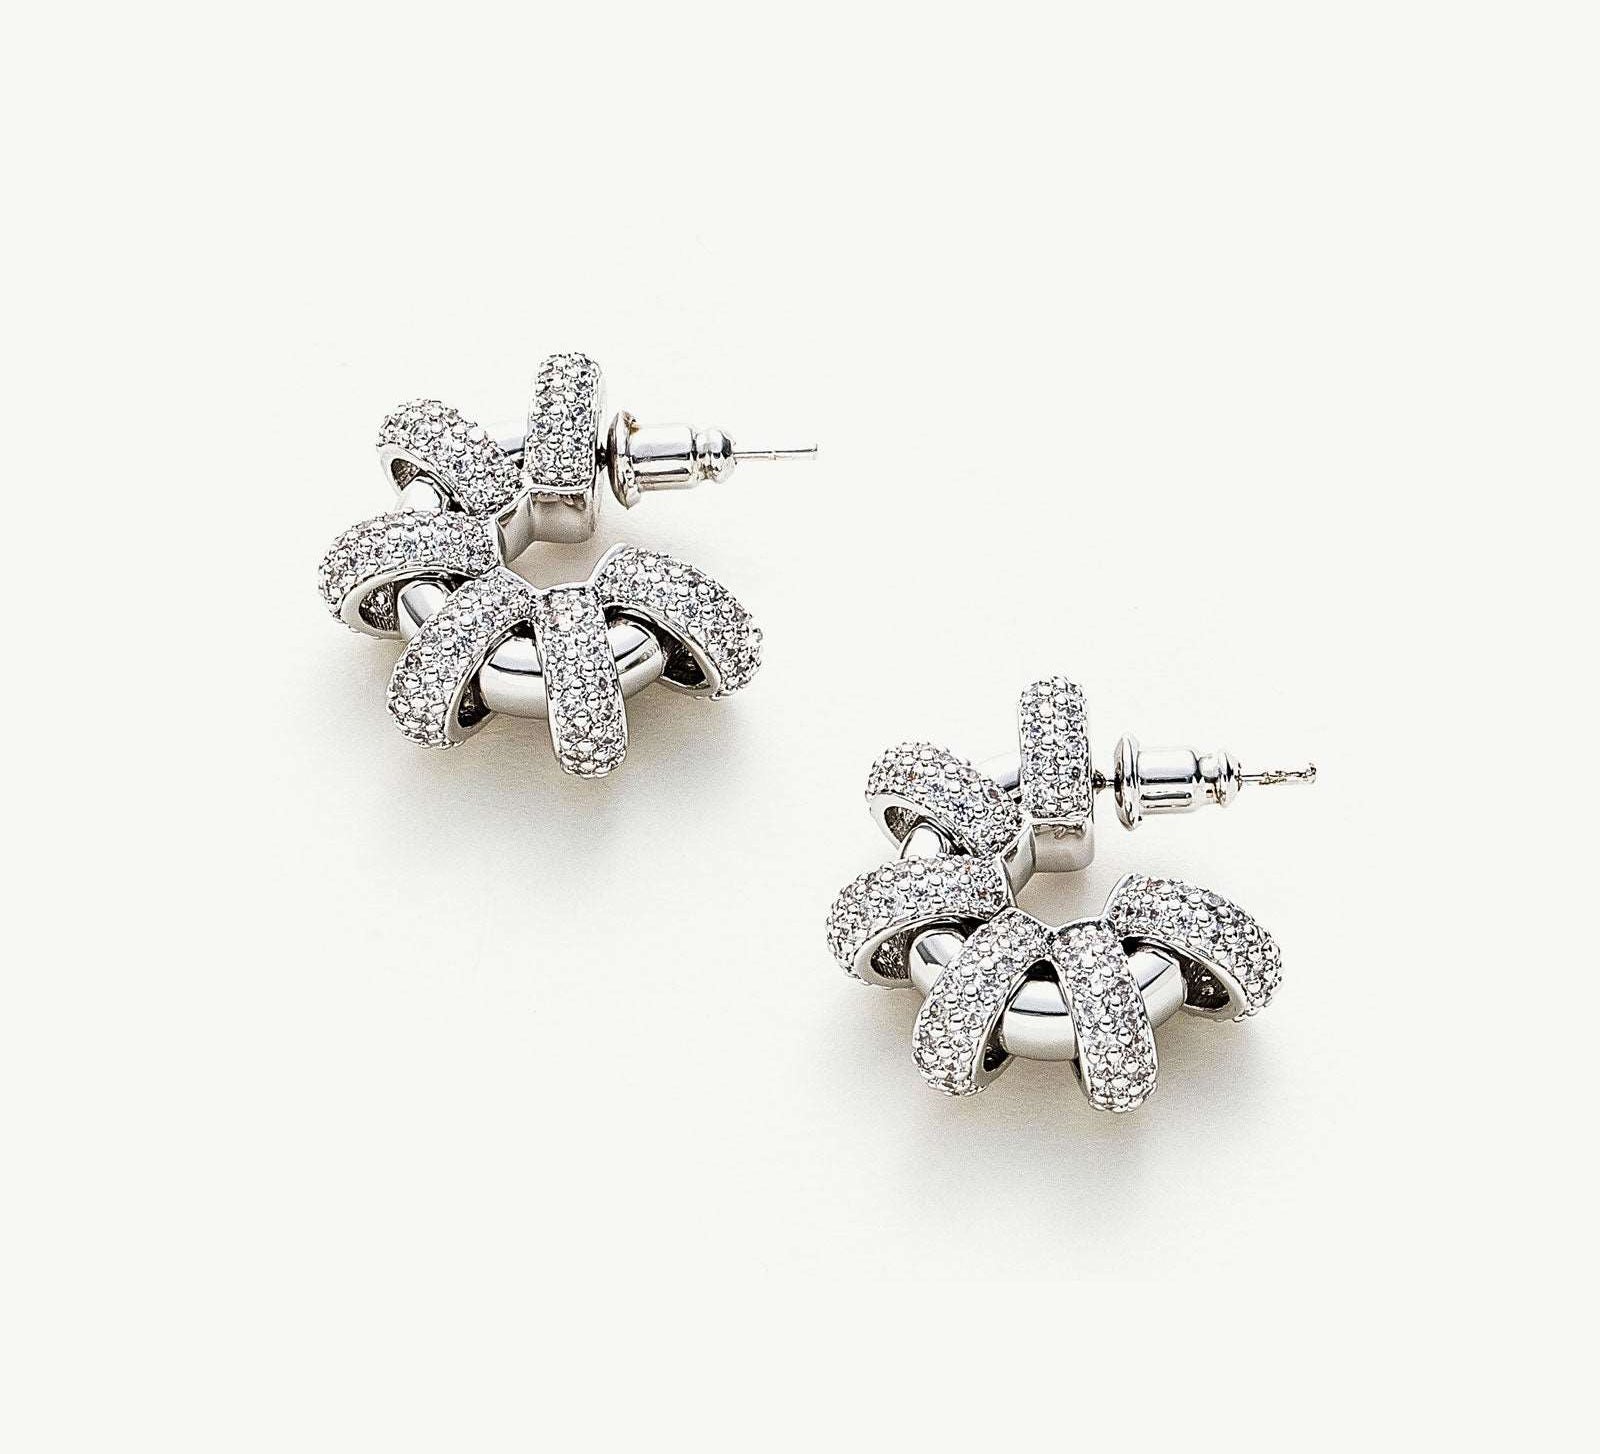 Coiled Single Earrings, featuring a singular coil design, these earrings exude elegance with a modern twist, adding a touch of sophistication to your ear ensemble